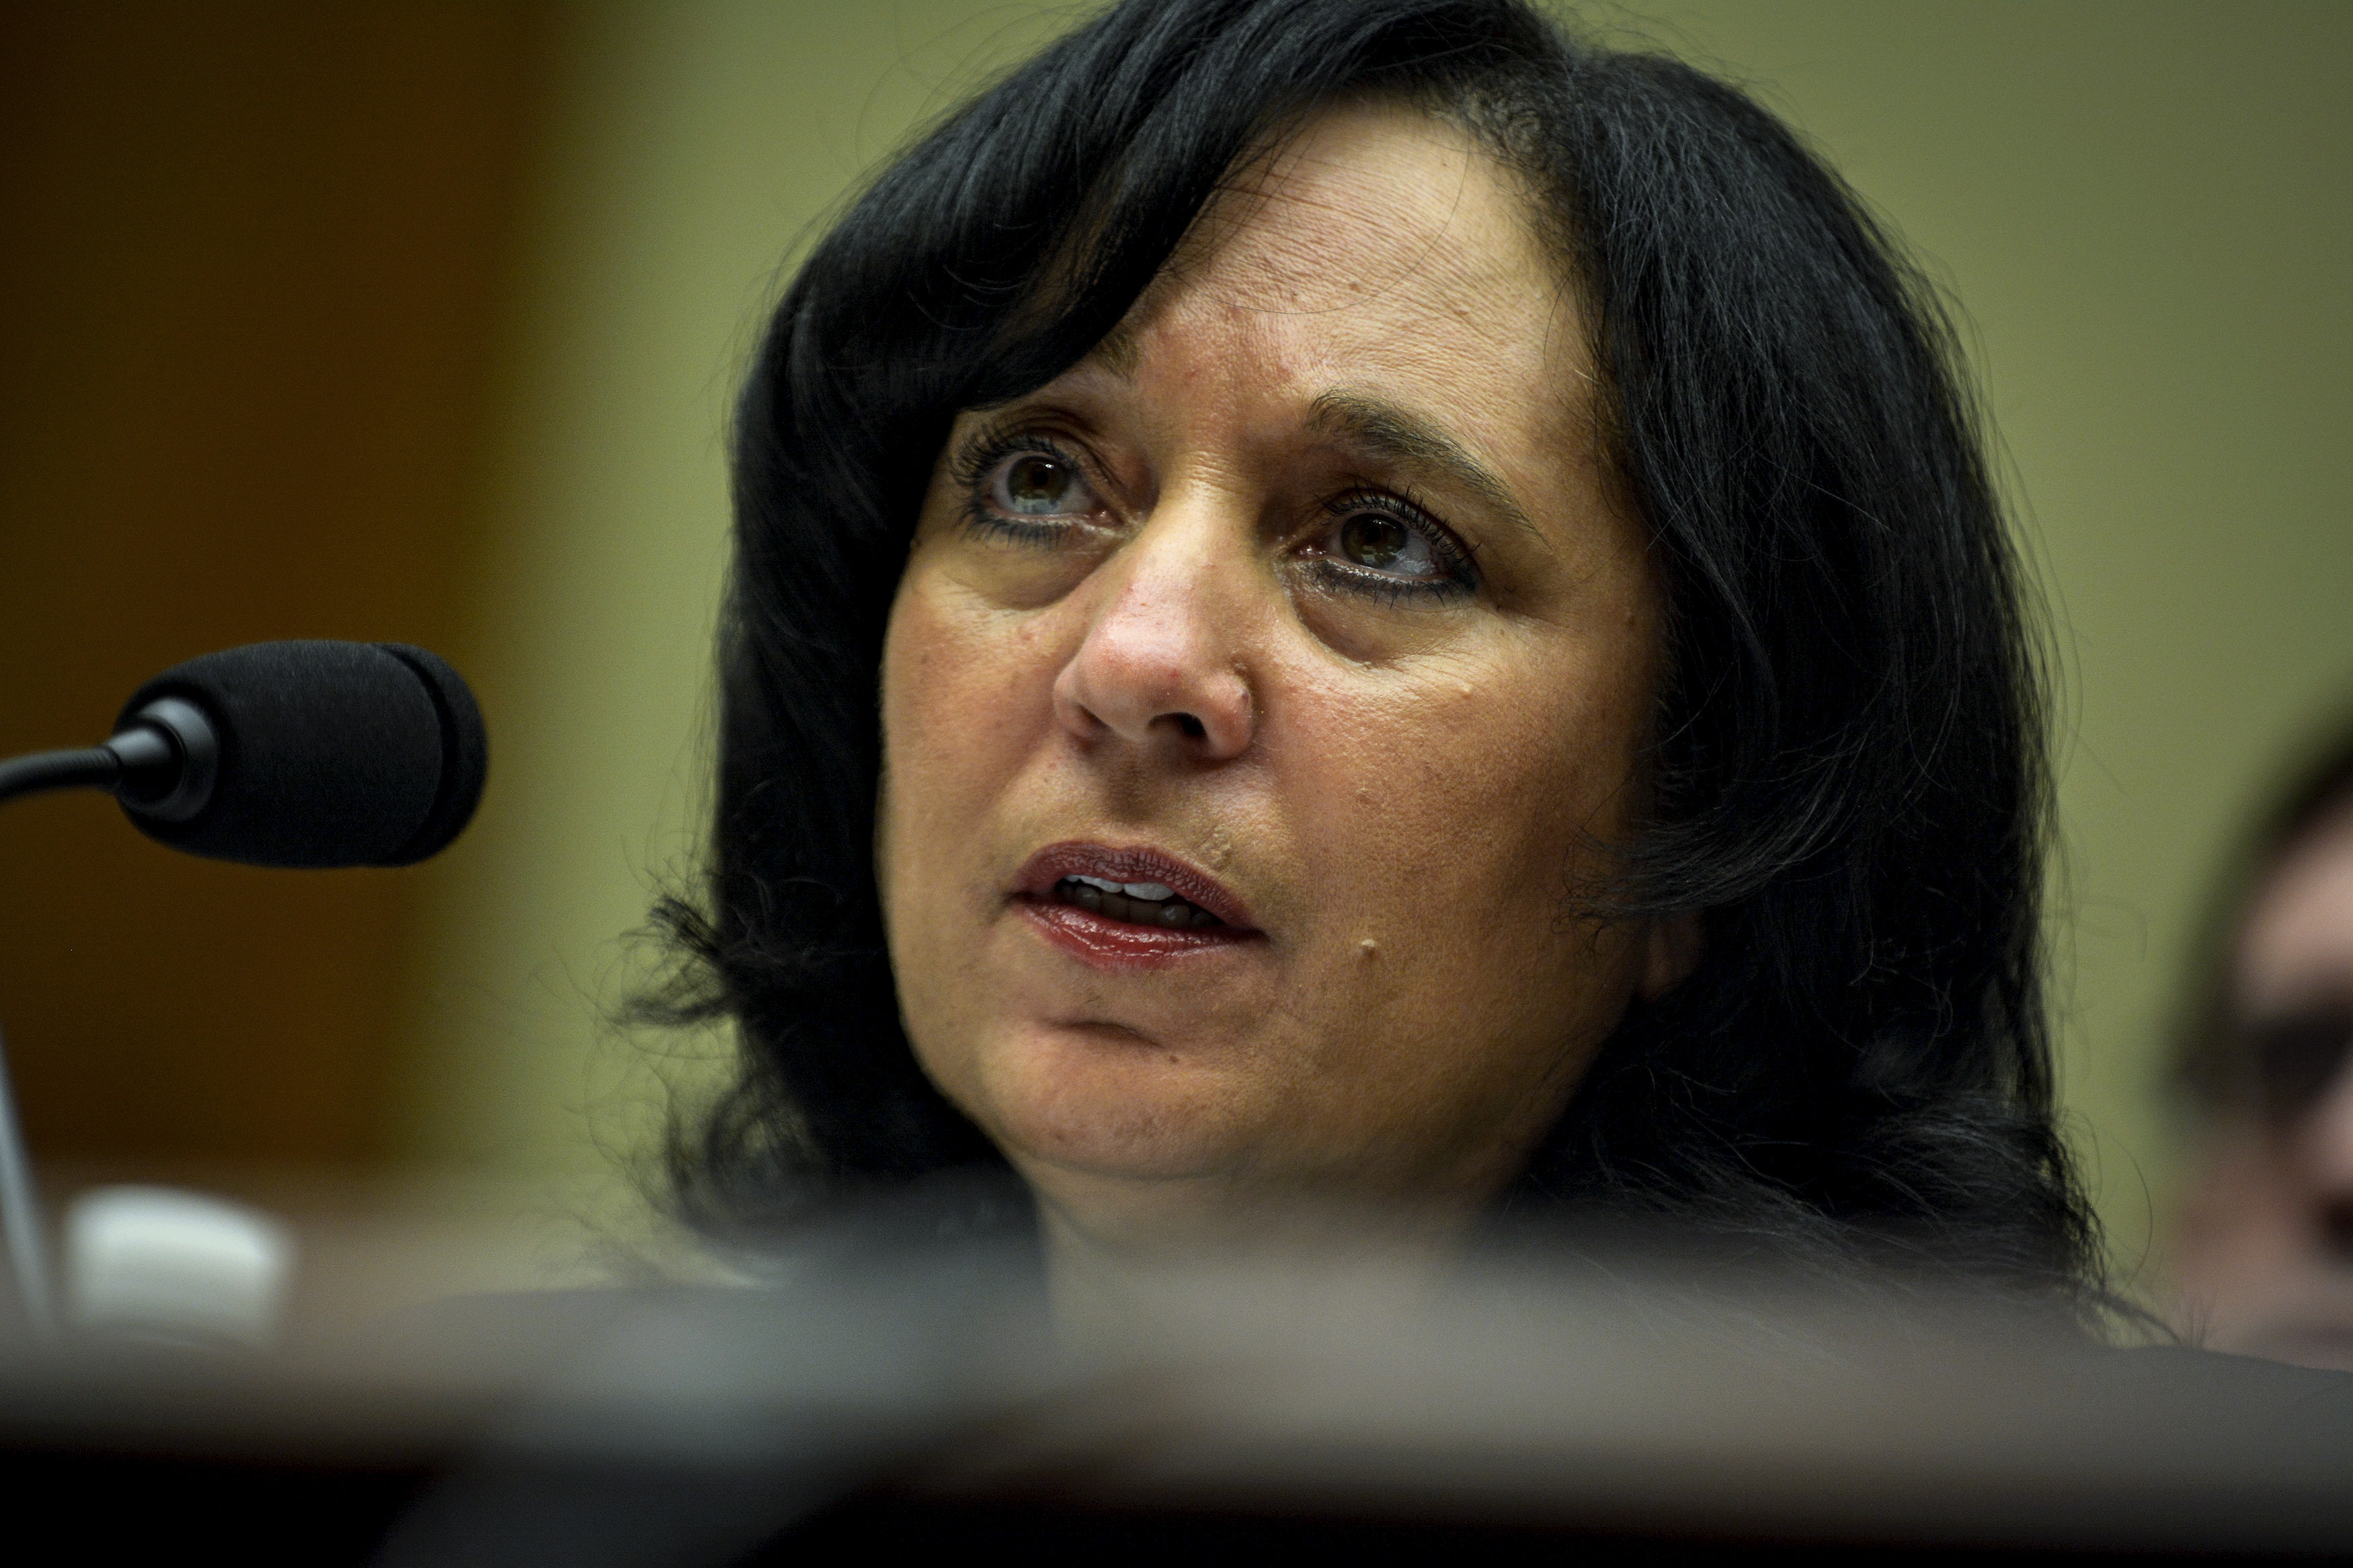 DEA administrator Michele Leonhart testifies before the House Committee on Oversight and Government Reform in a hearing on sexual harassment and misconduct allegations at the DEA and FBI in Washington on April 14, 2015. (James Lawler Duggan—Reuters)